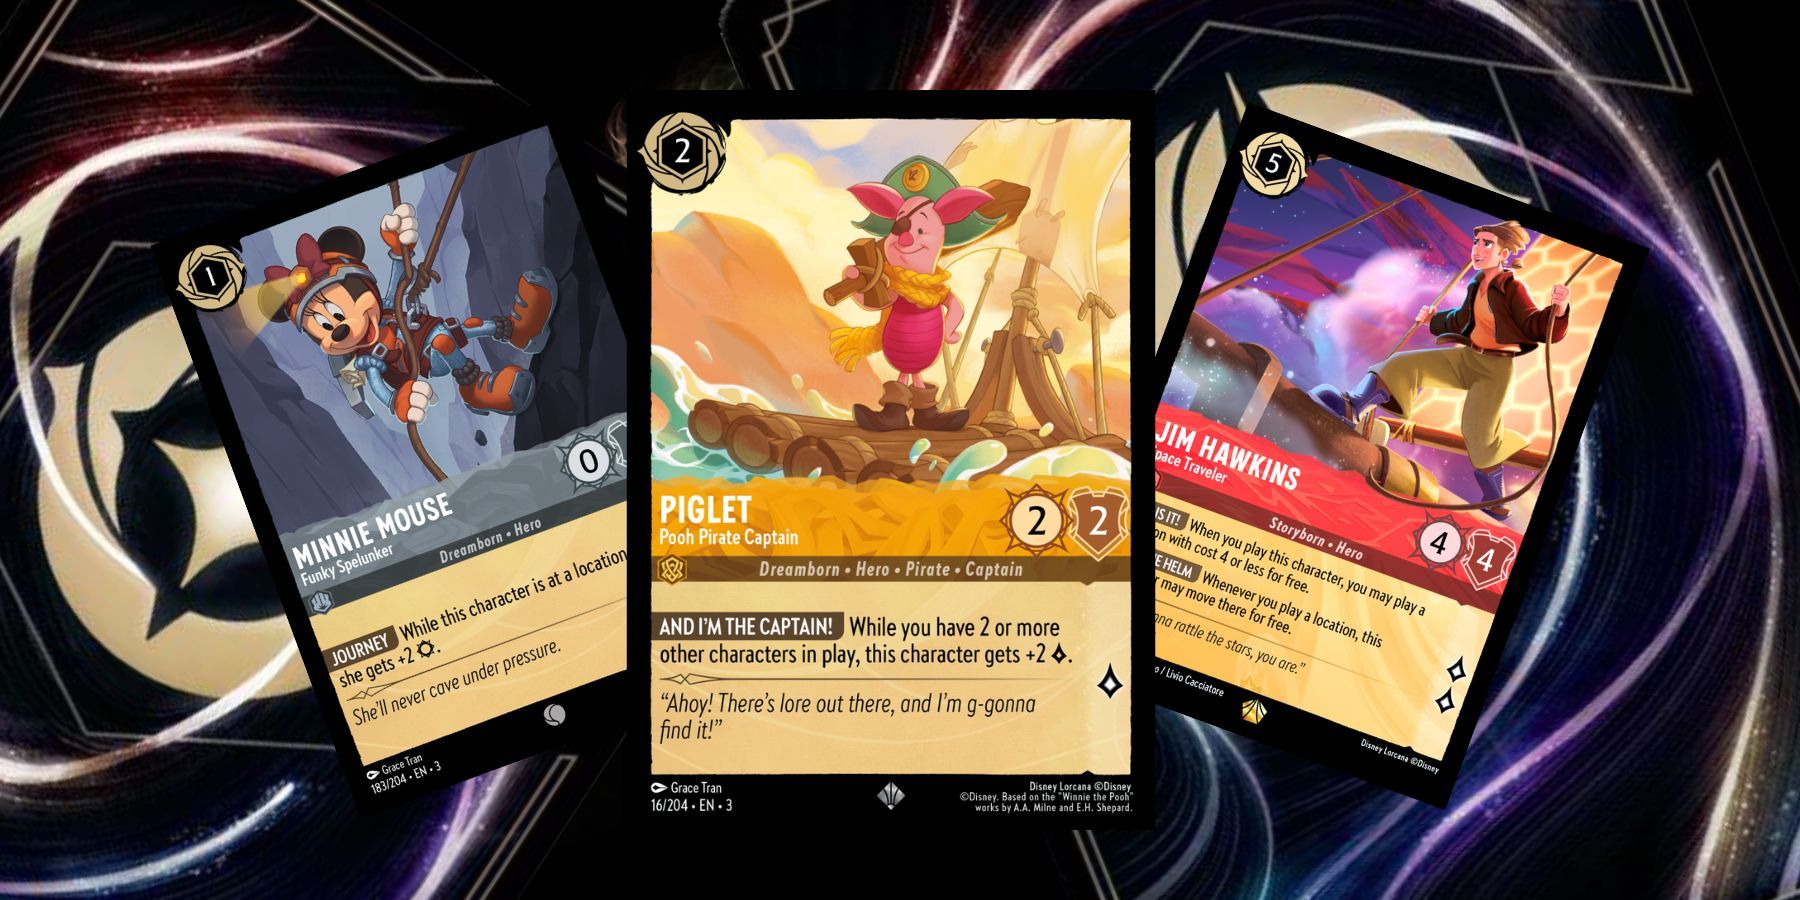 Disney's Lorcana TCG Announces Official Release Dates For The First  Chapter, Starter Decks, And More - Star City Games